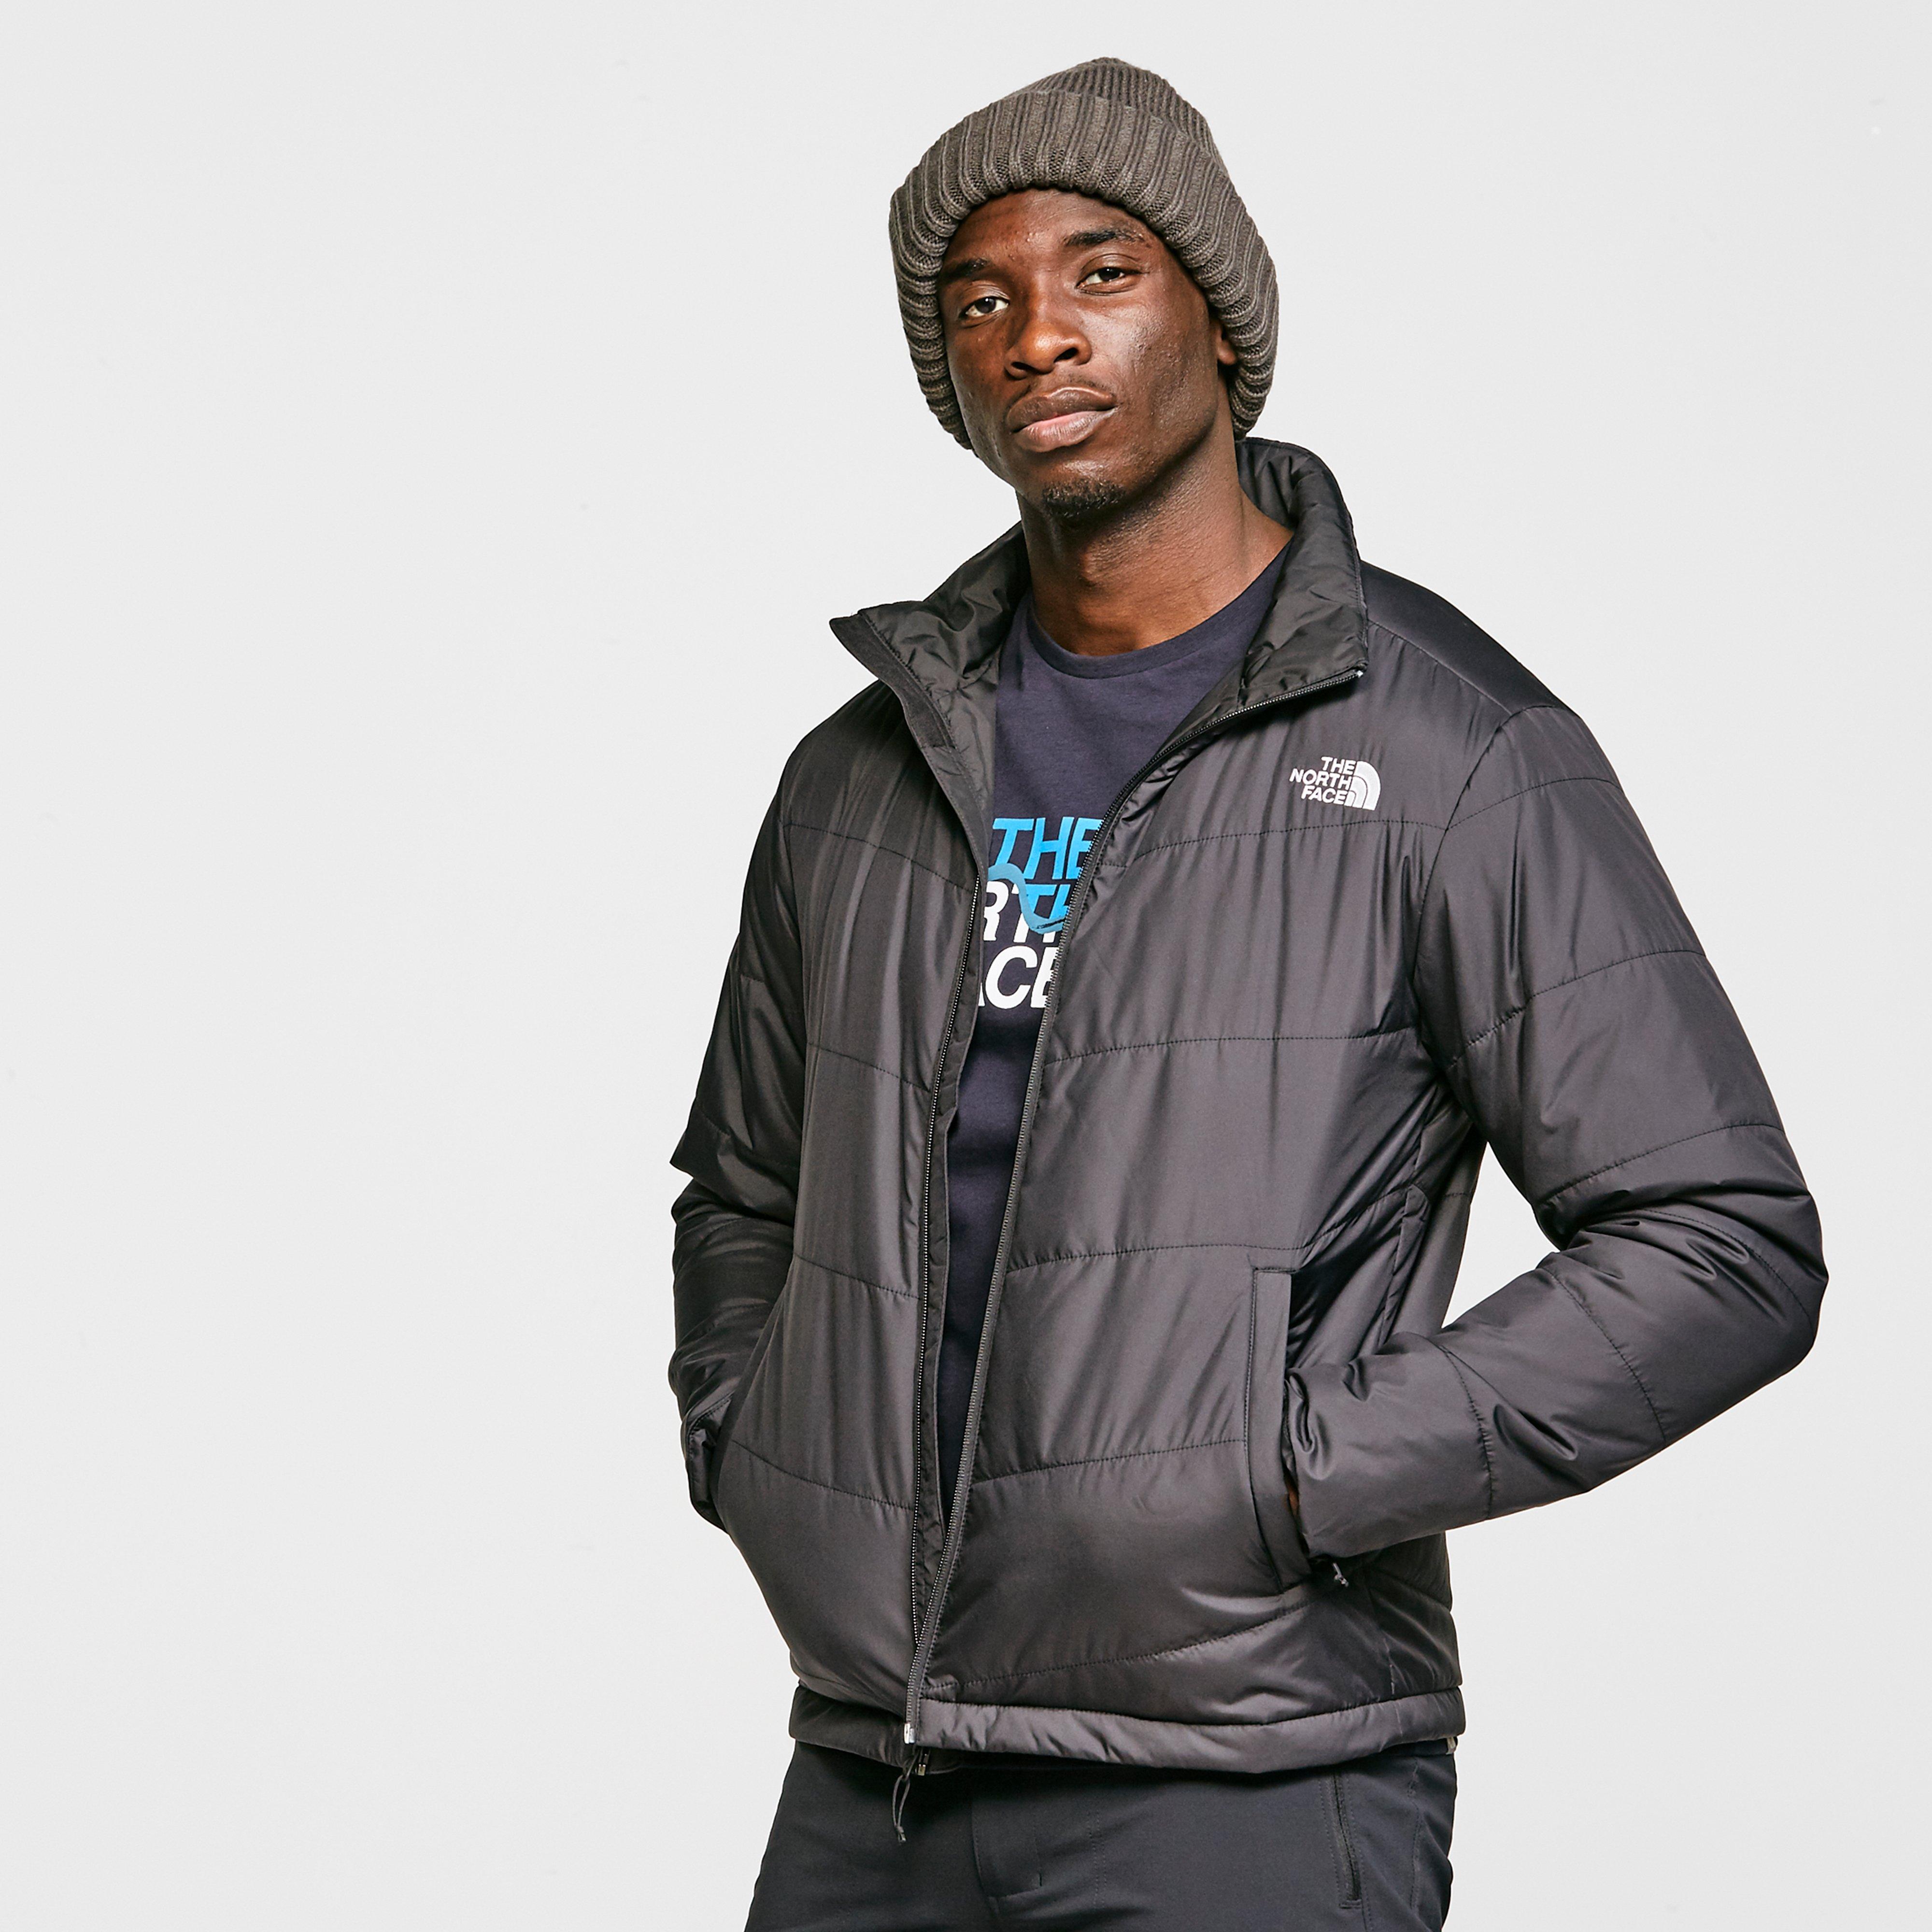 mens north face insulated jacket